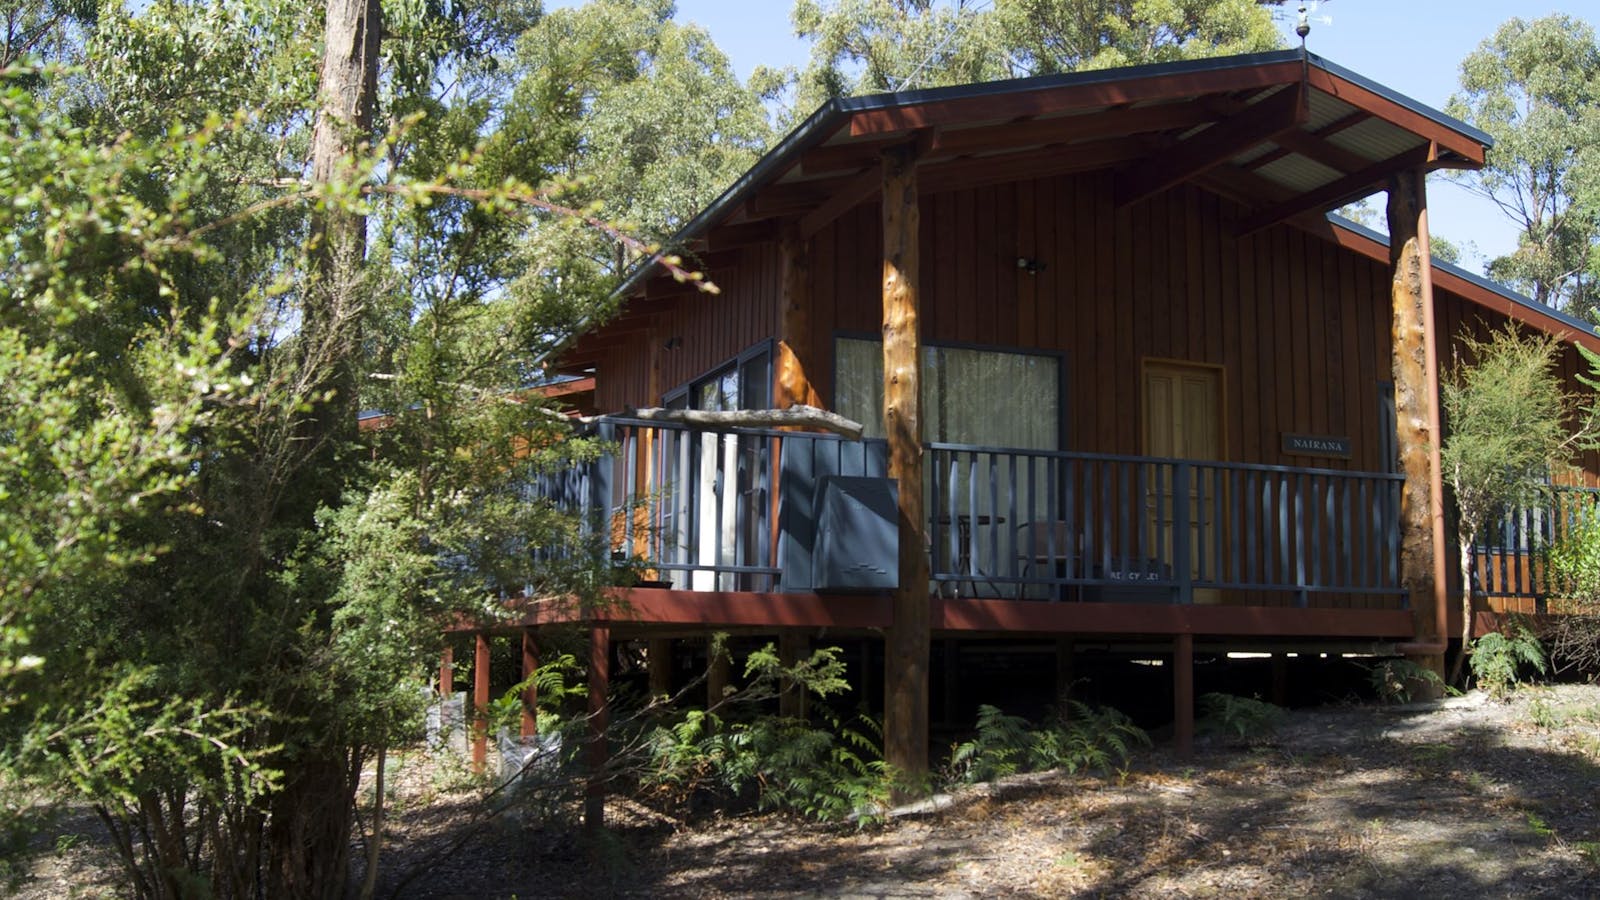 The deck of Nairana cottage provides great views of surrounding forest.